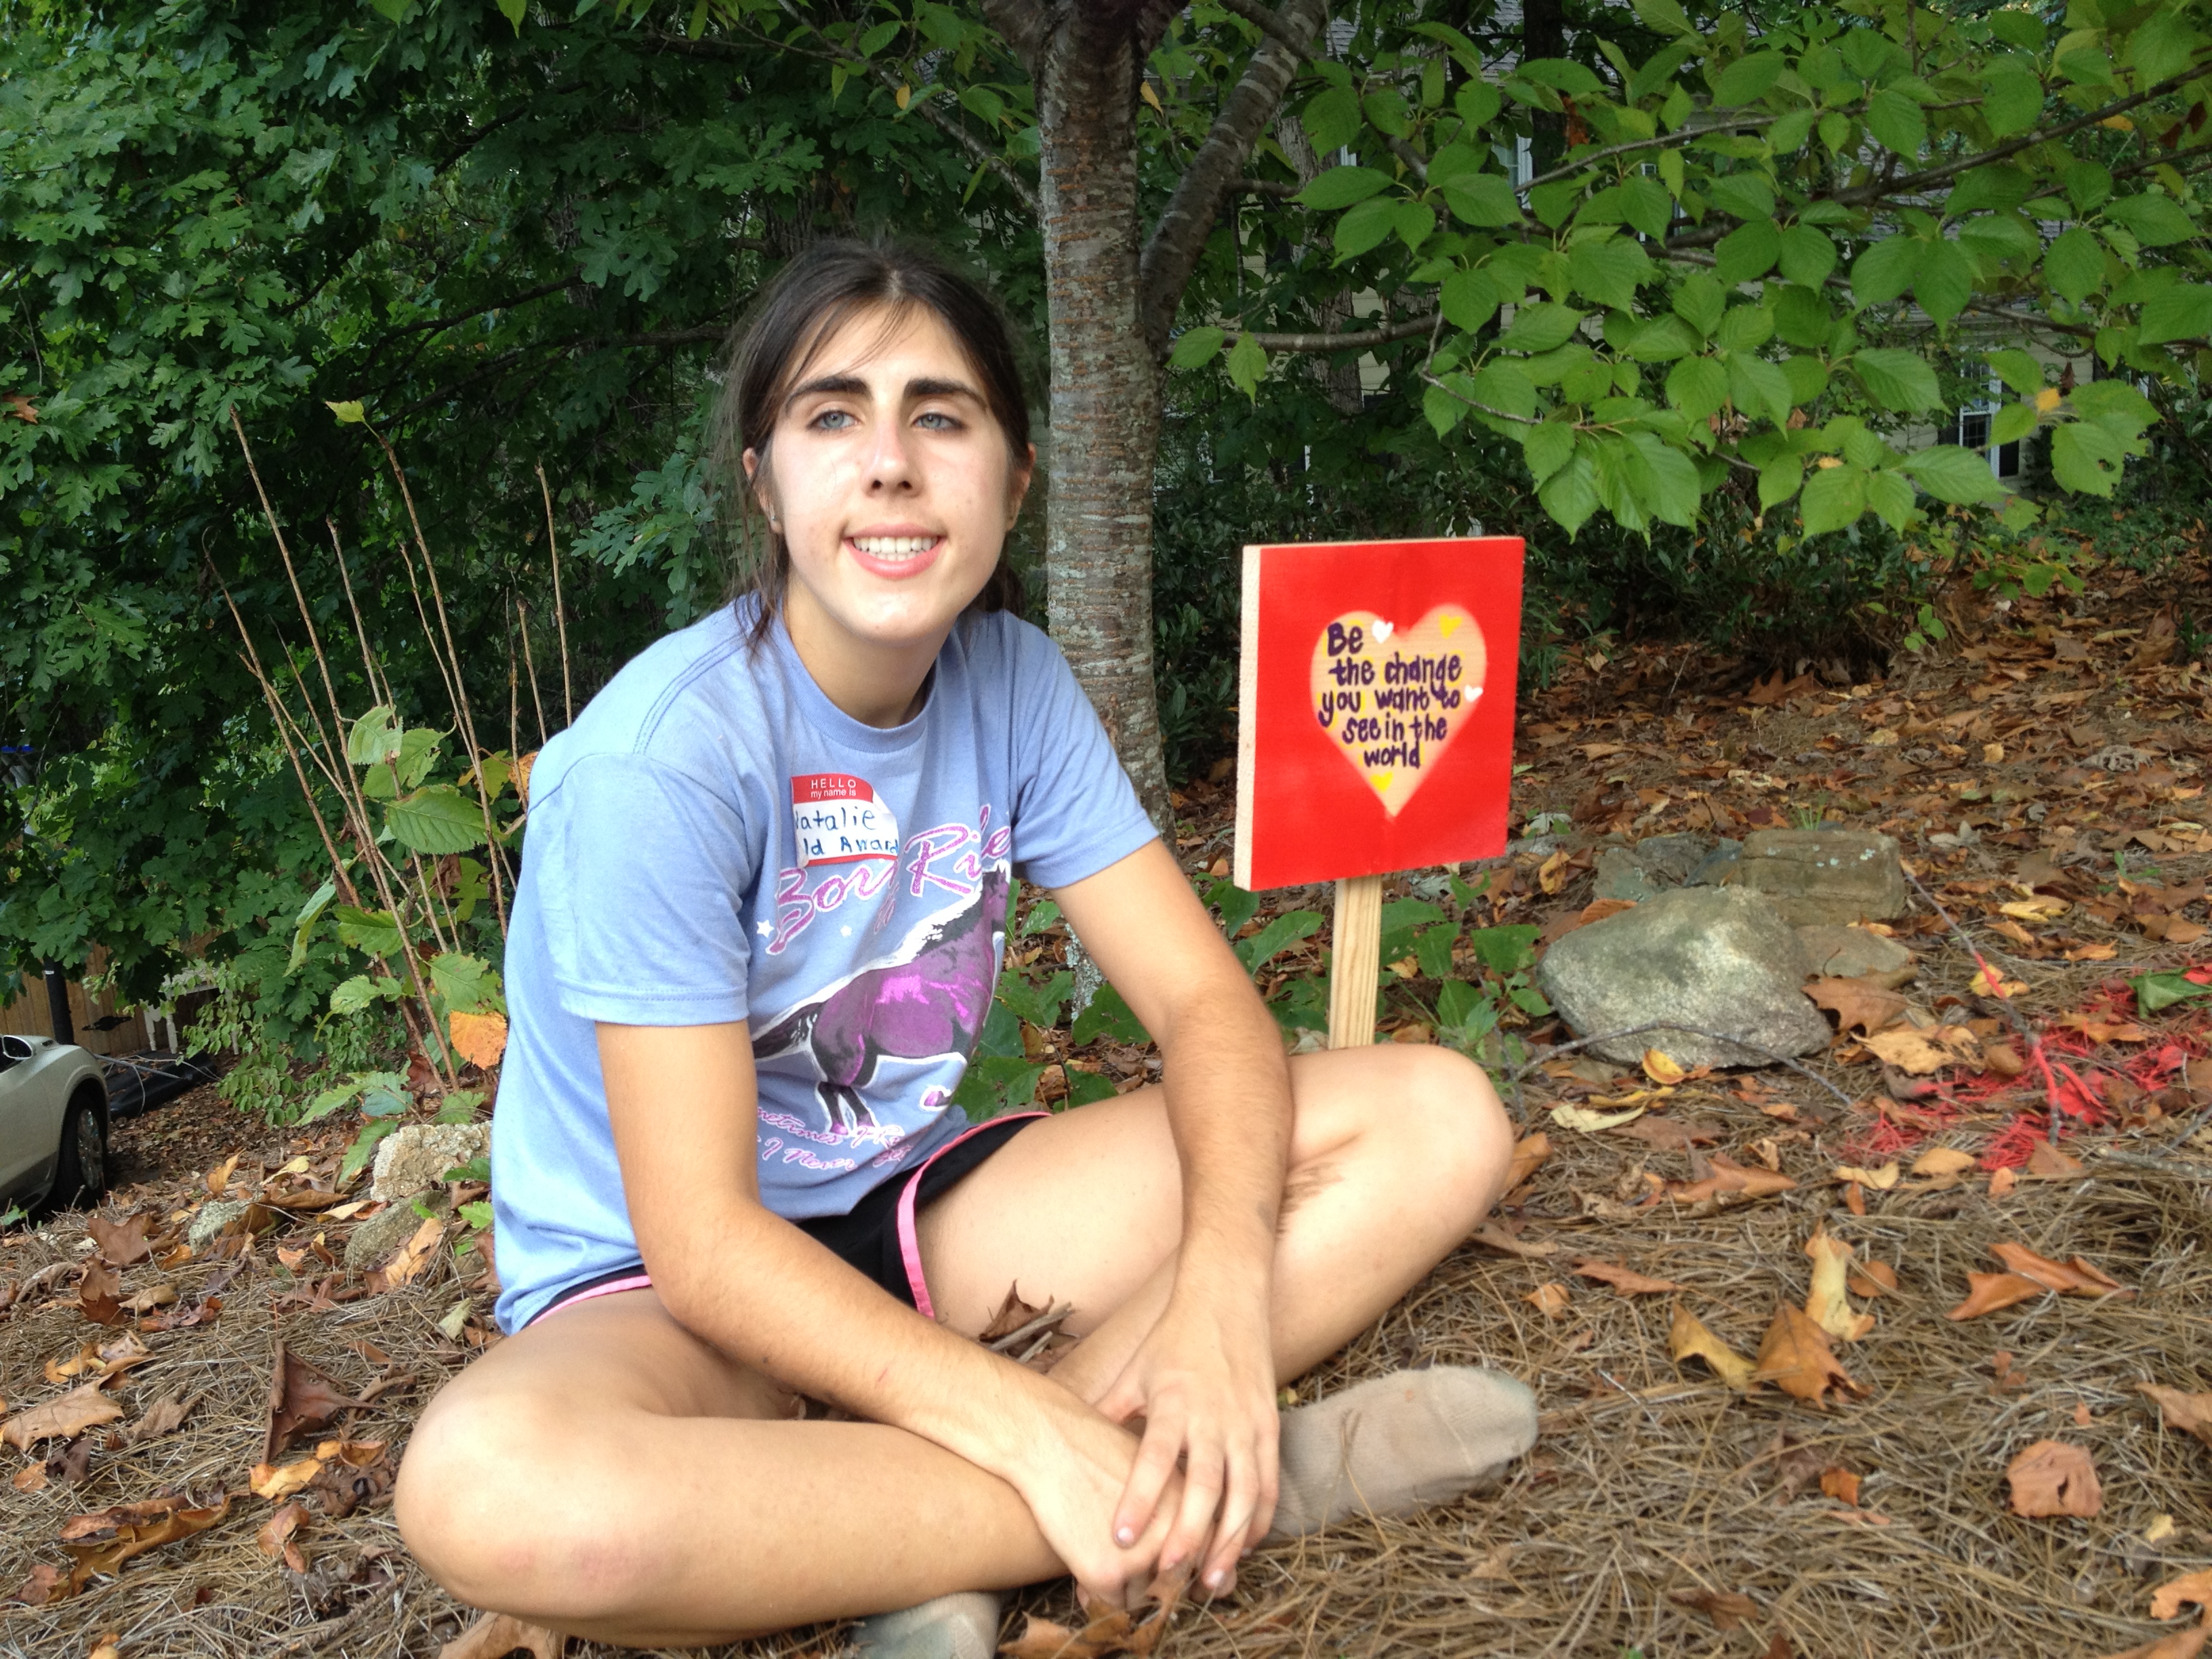 Natalie Anderson with The Milton Love Project sign